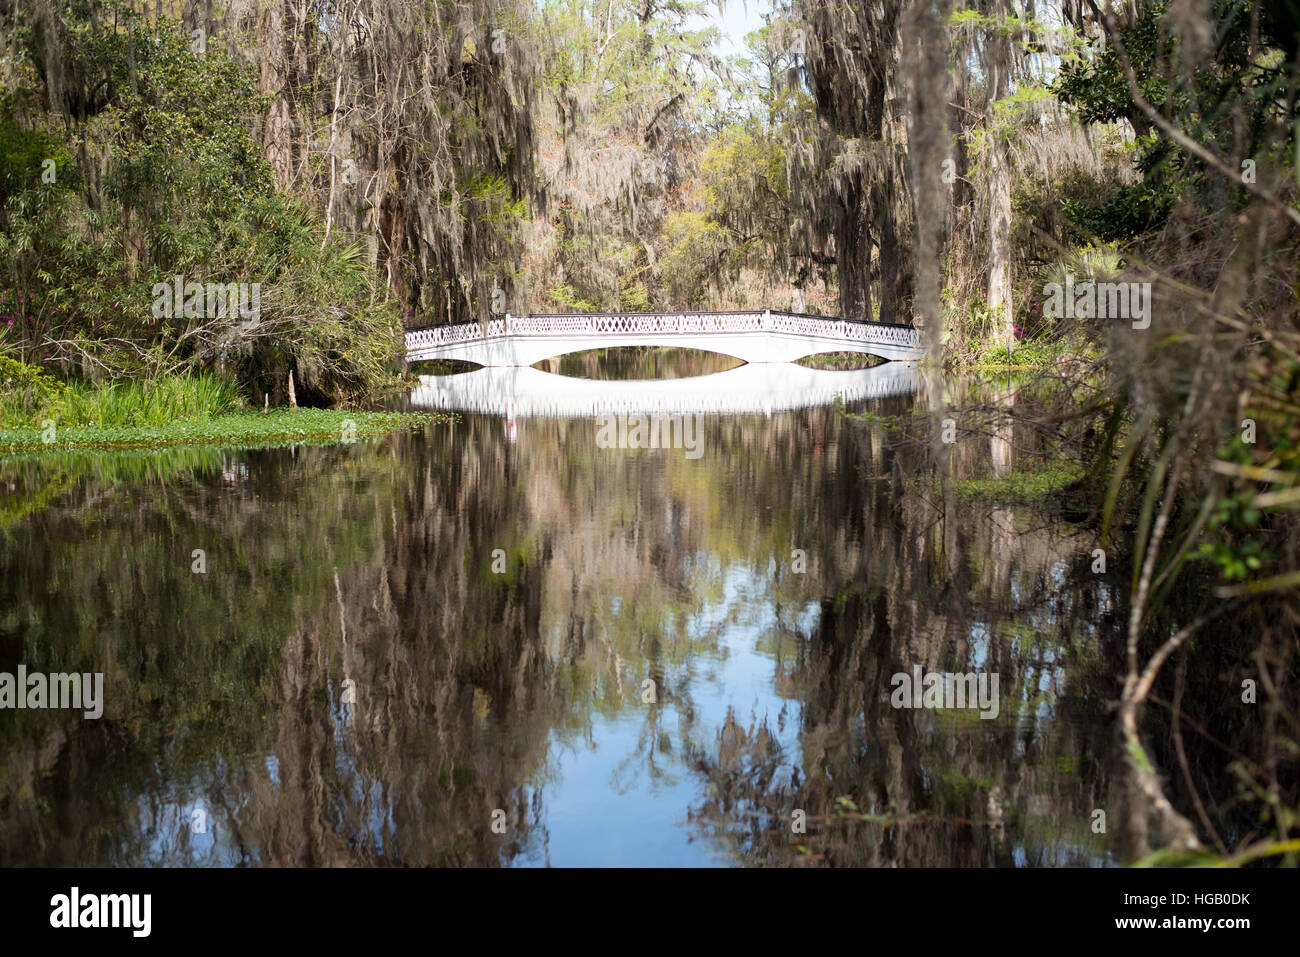 South Carolina Plantation Pond with White Bridge Reflected in Water Stock Photo